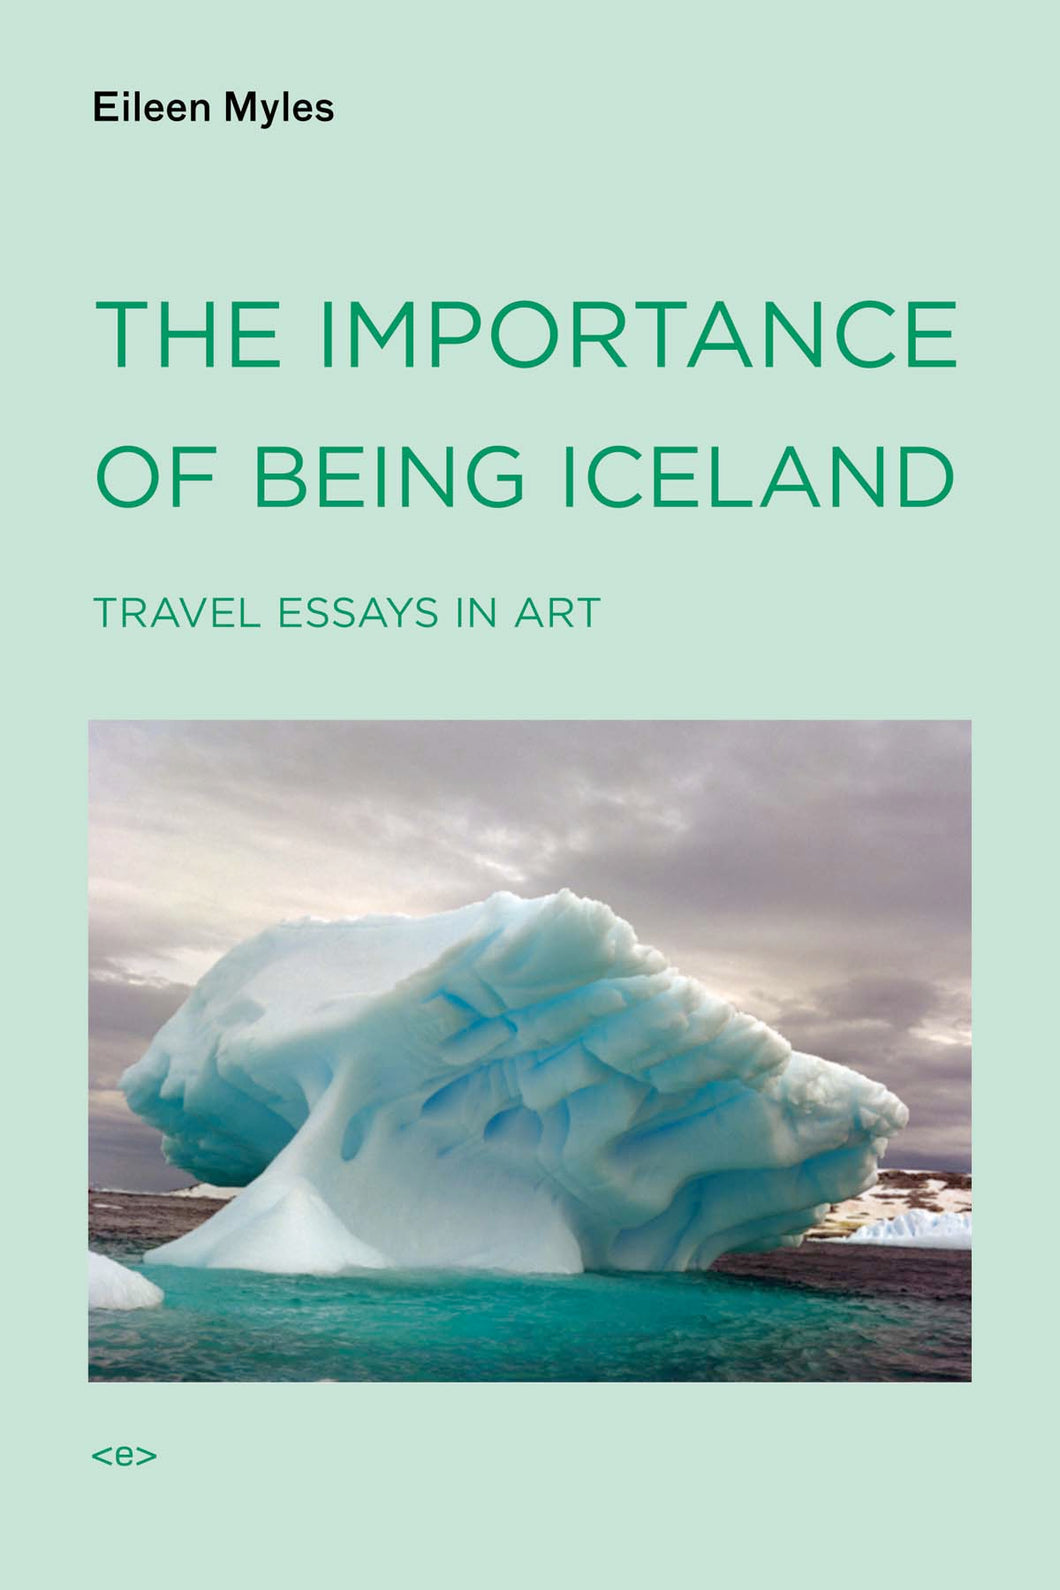 The Importance of Being Iceland: Travel Essays in Art by Eileen Myles